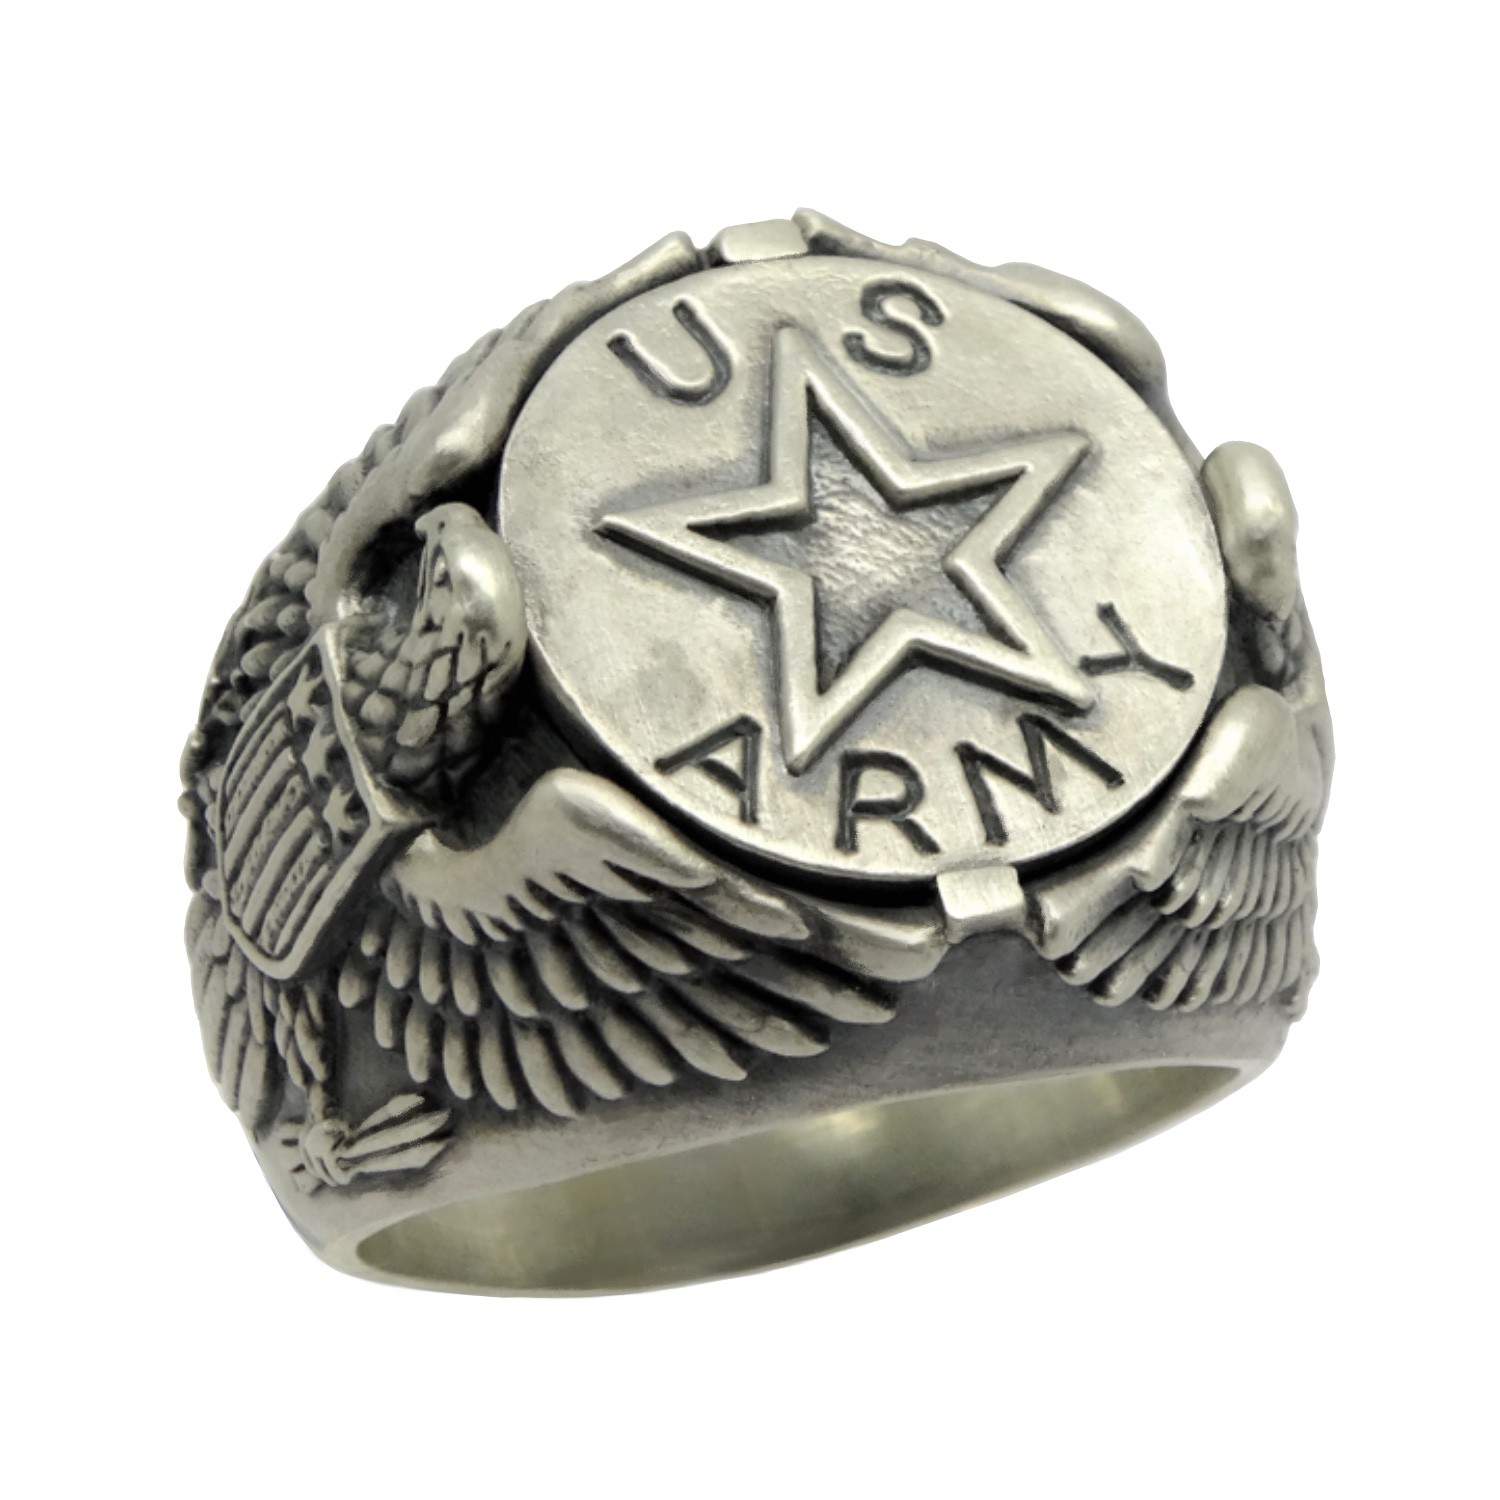 Carroll Collection of U.S. Eagle Rings - Handcrafted Military Rings